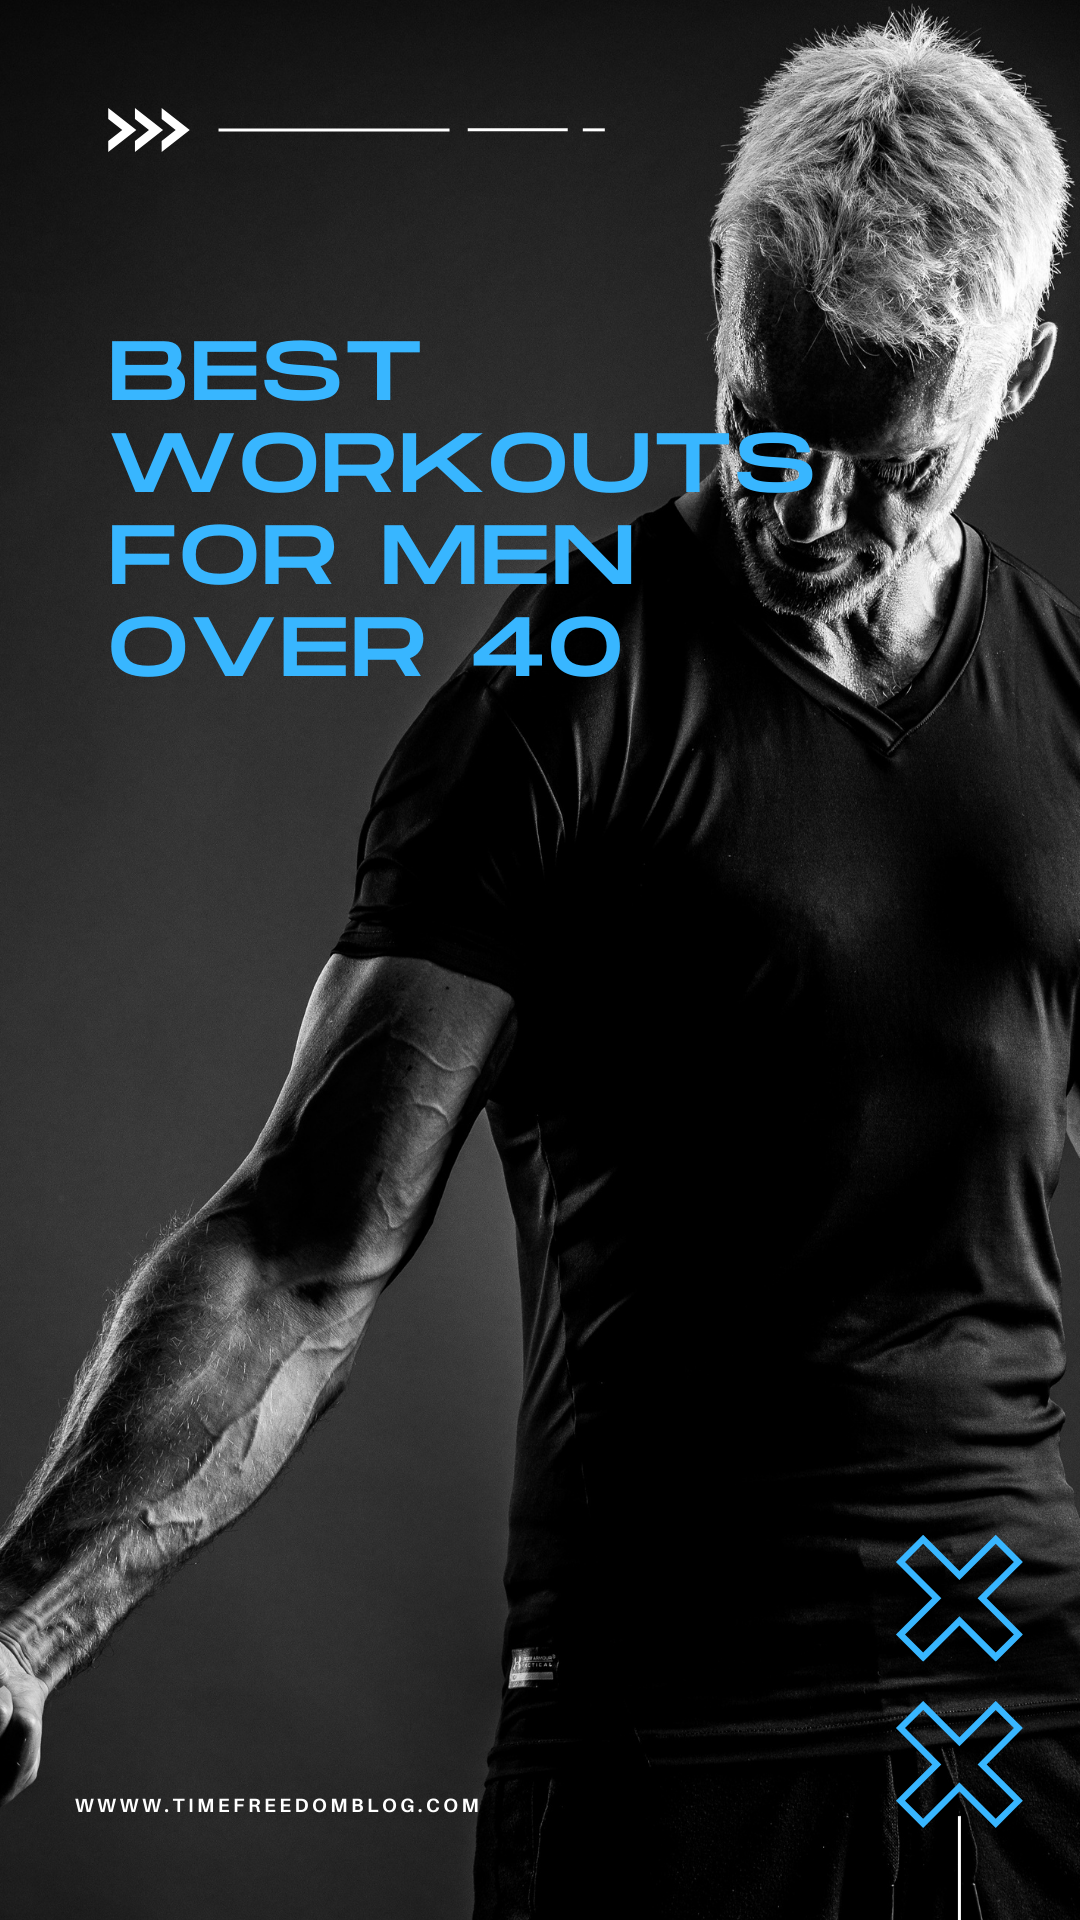 Best workouts for men over 40